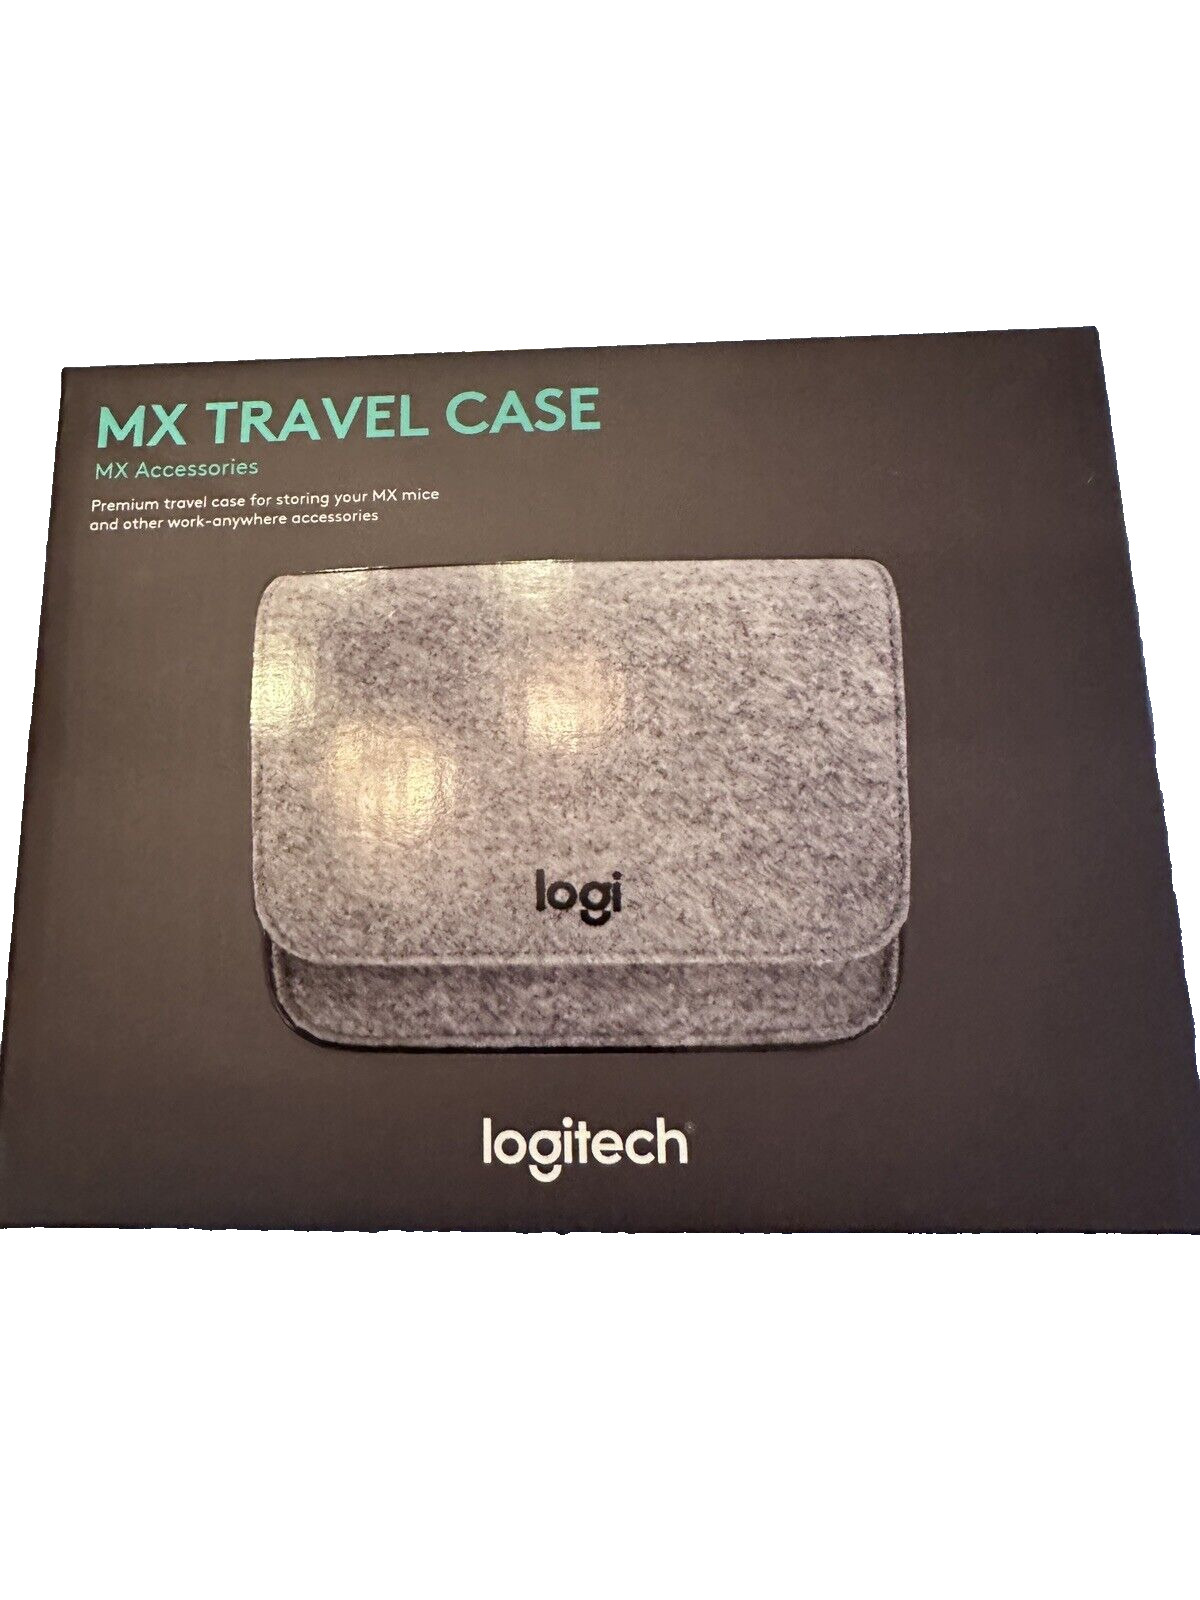 New & Sealed Logitech MX Travel Case Compatible with MX Anywhere 3 & MX Master 3